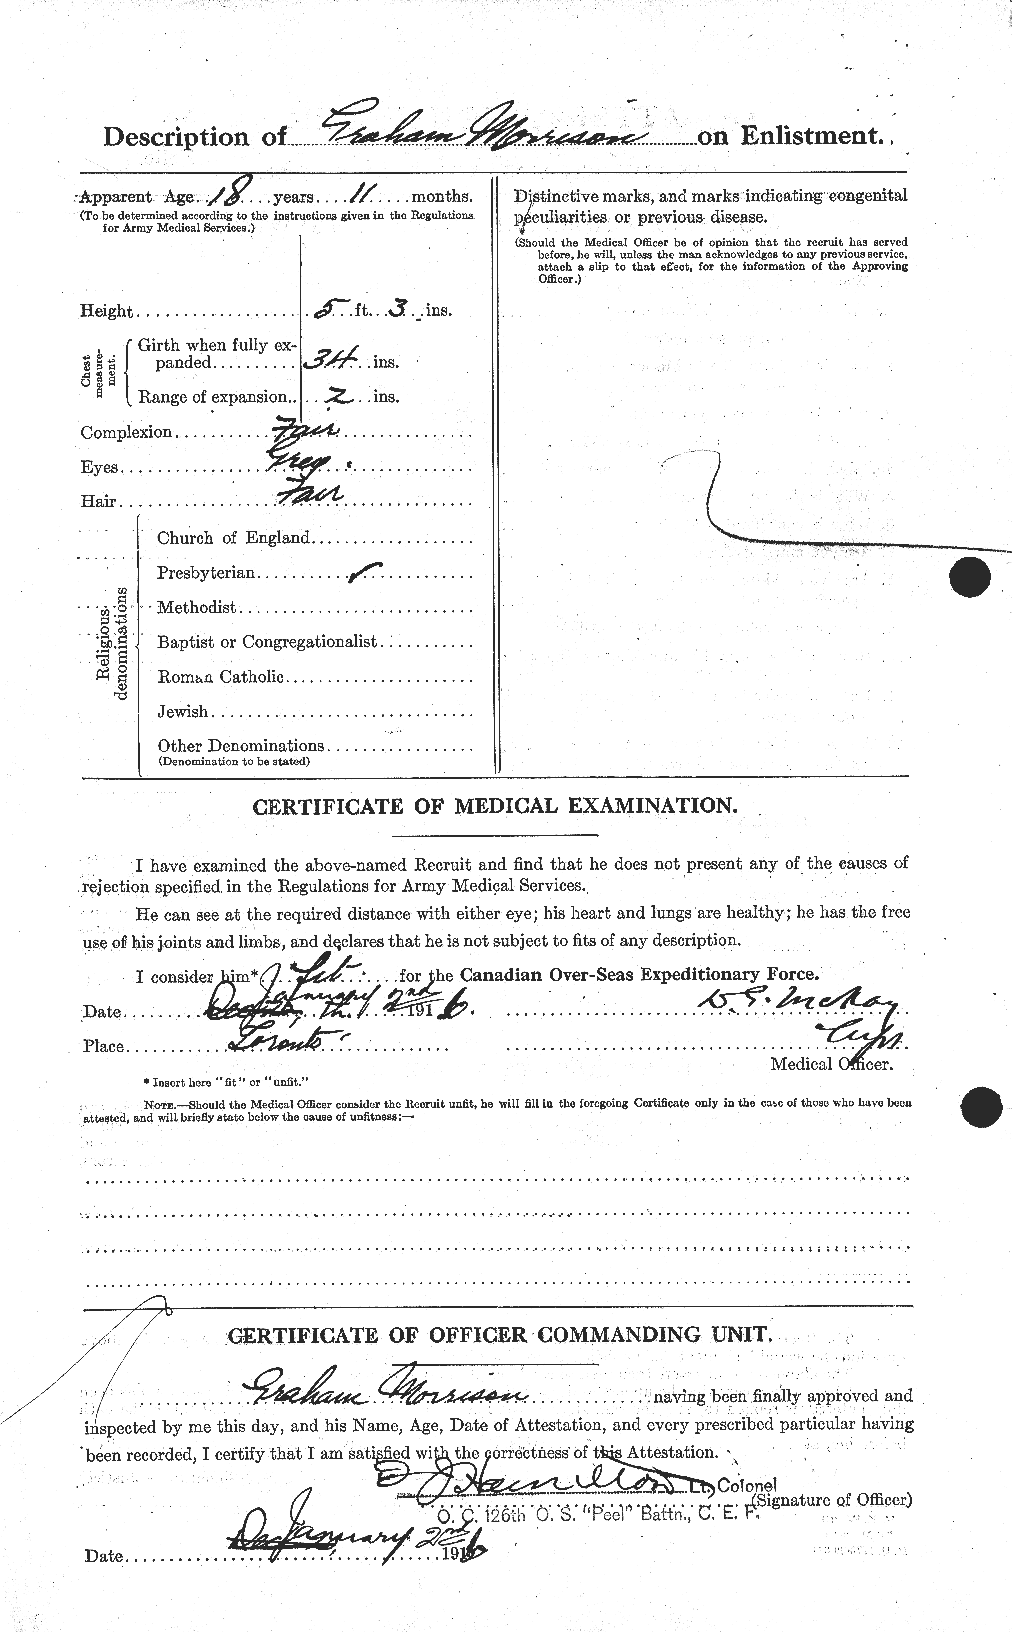 Personnel Records of the First World War - CEF 506831b